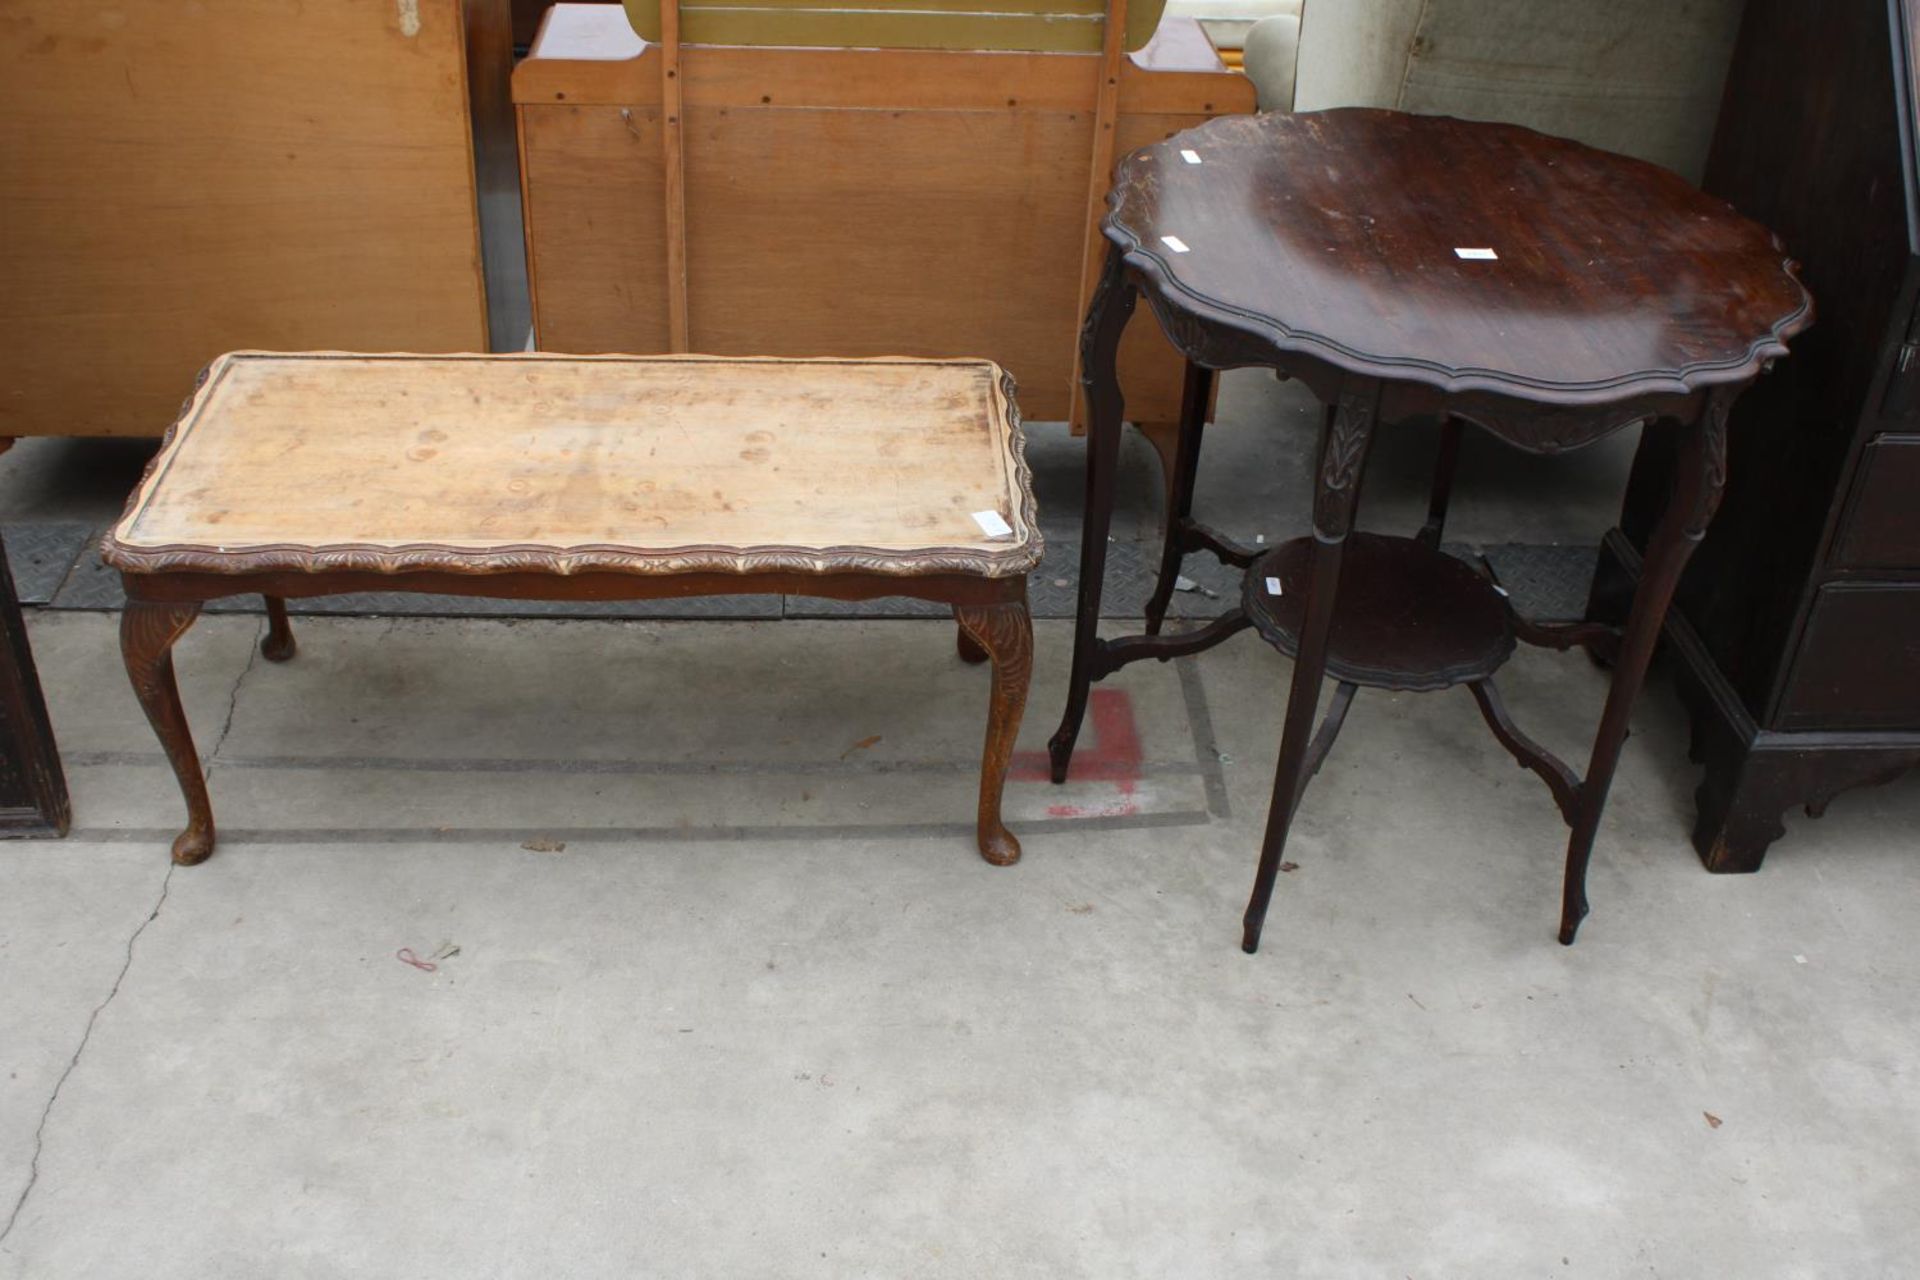 A LATE VICTORIAN TWO TIER CENTRE TABLE AND MODERN COFFEE TABLE